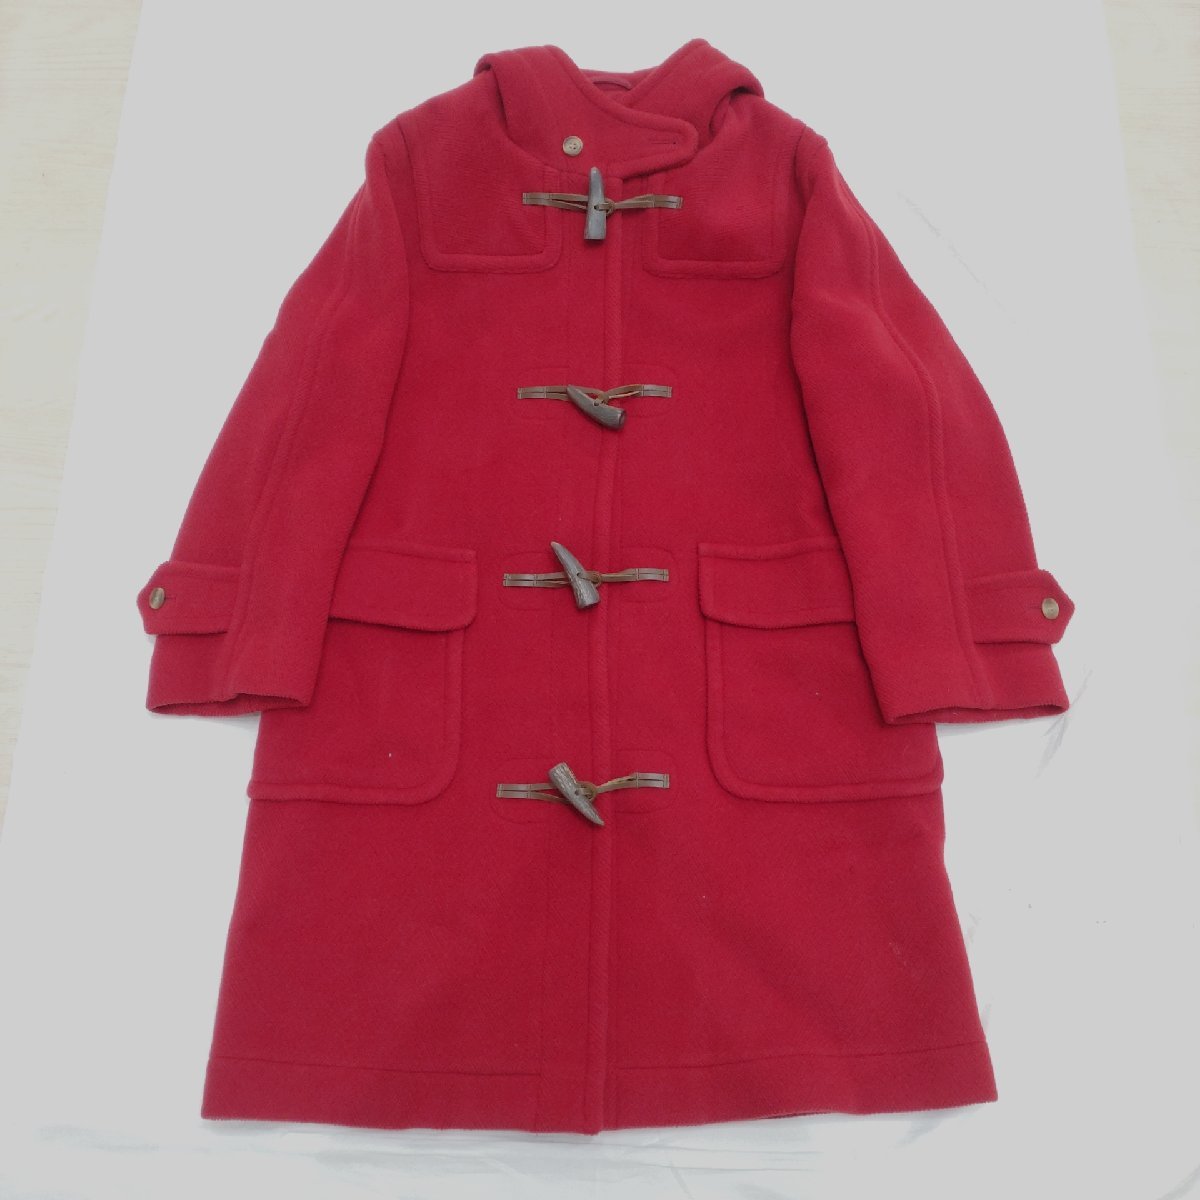 OLD ENGLAND duffle coat size :10 red Old England 